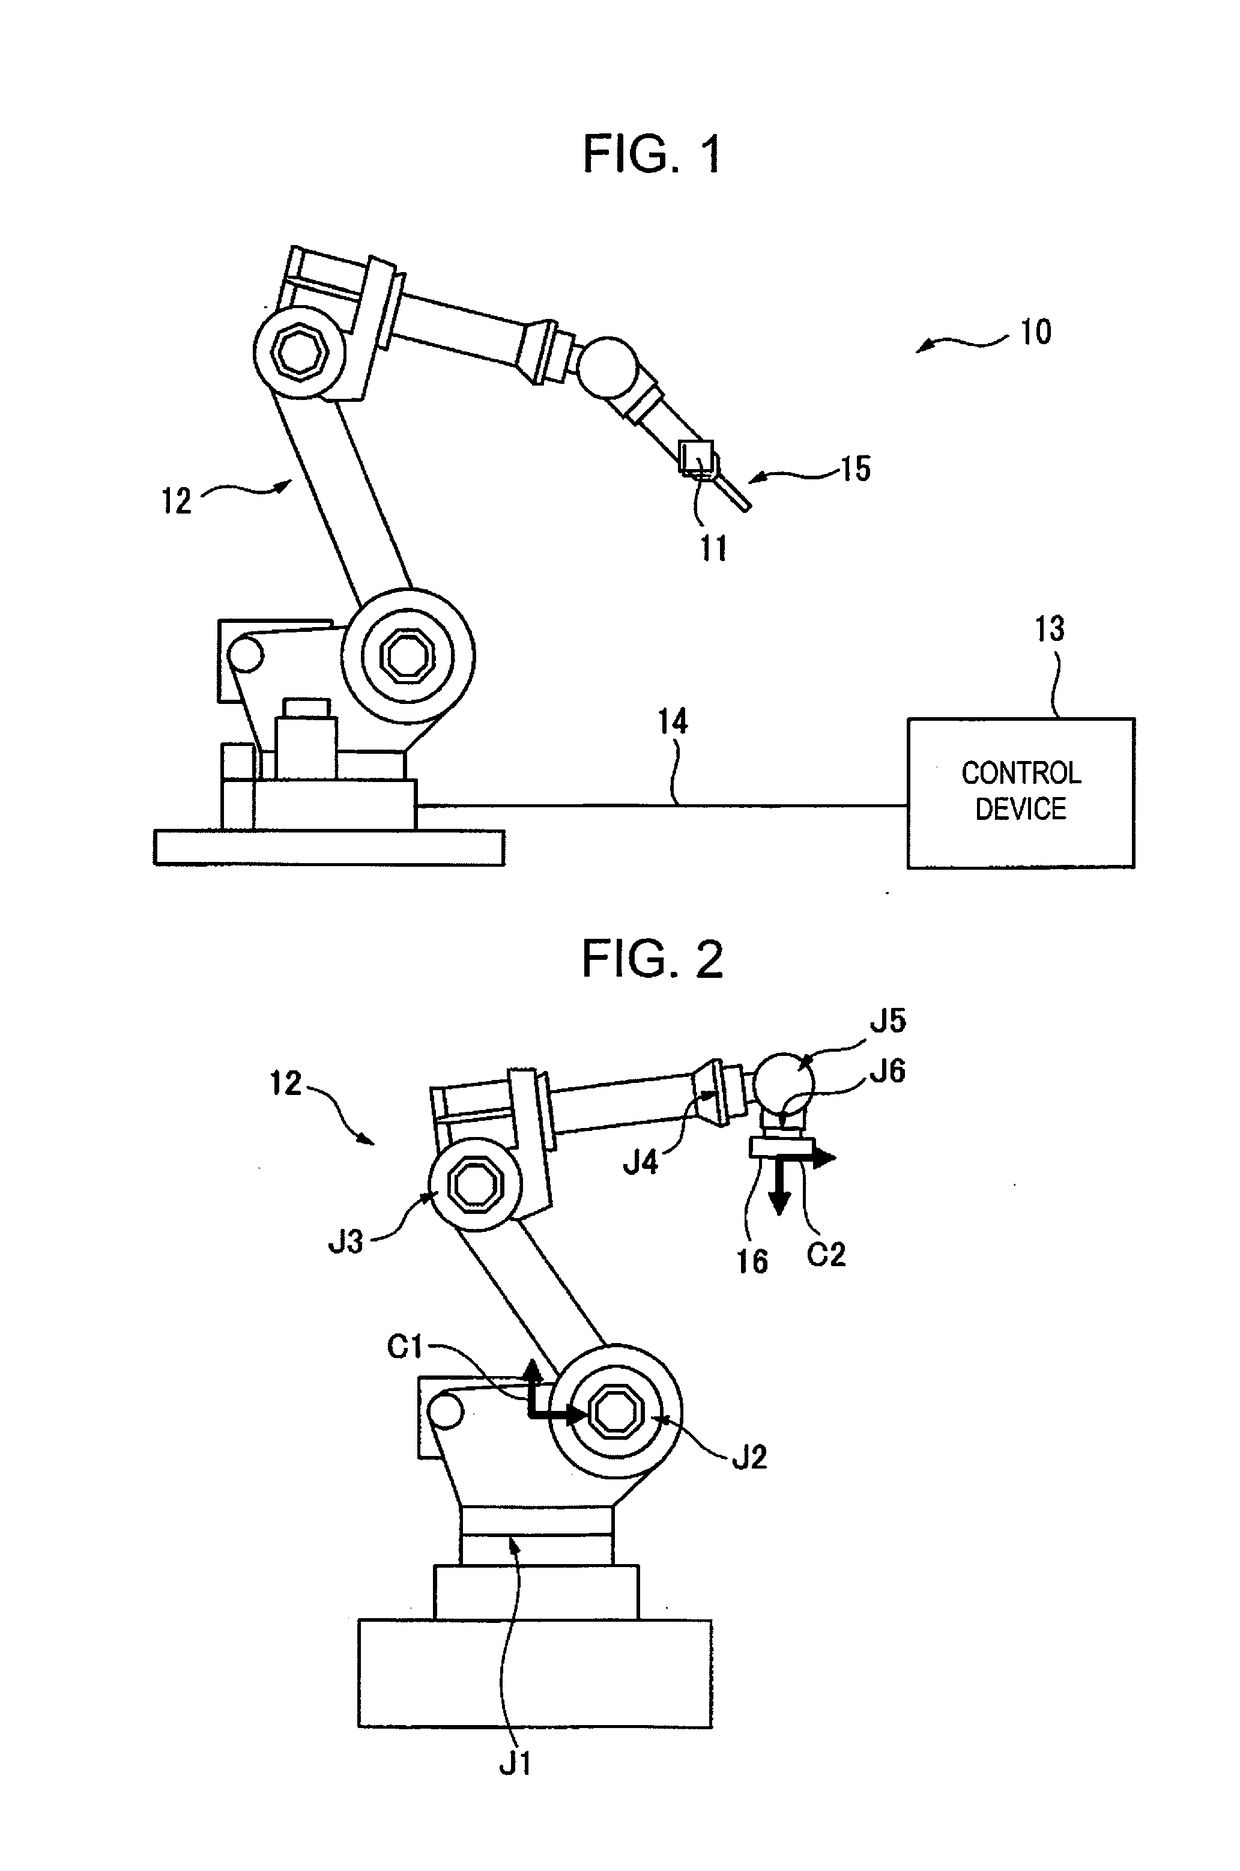 Robot that carries out learning control in applications requiring constant speeds, and control method thereof